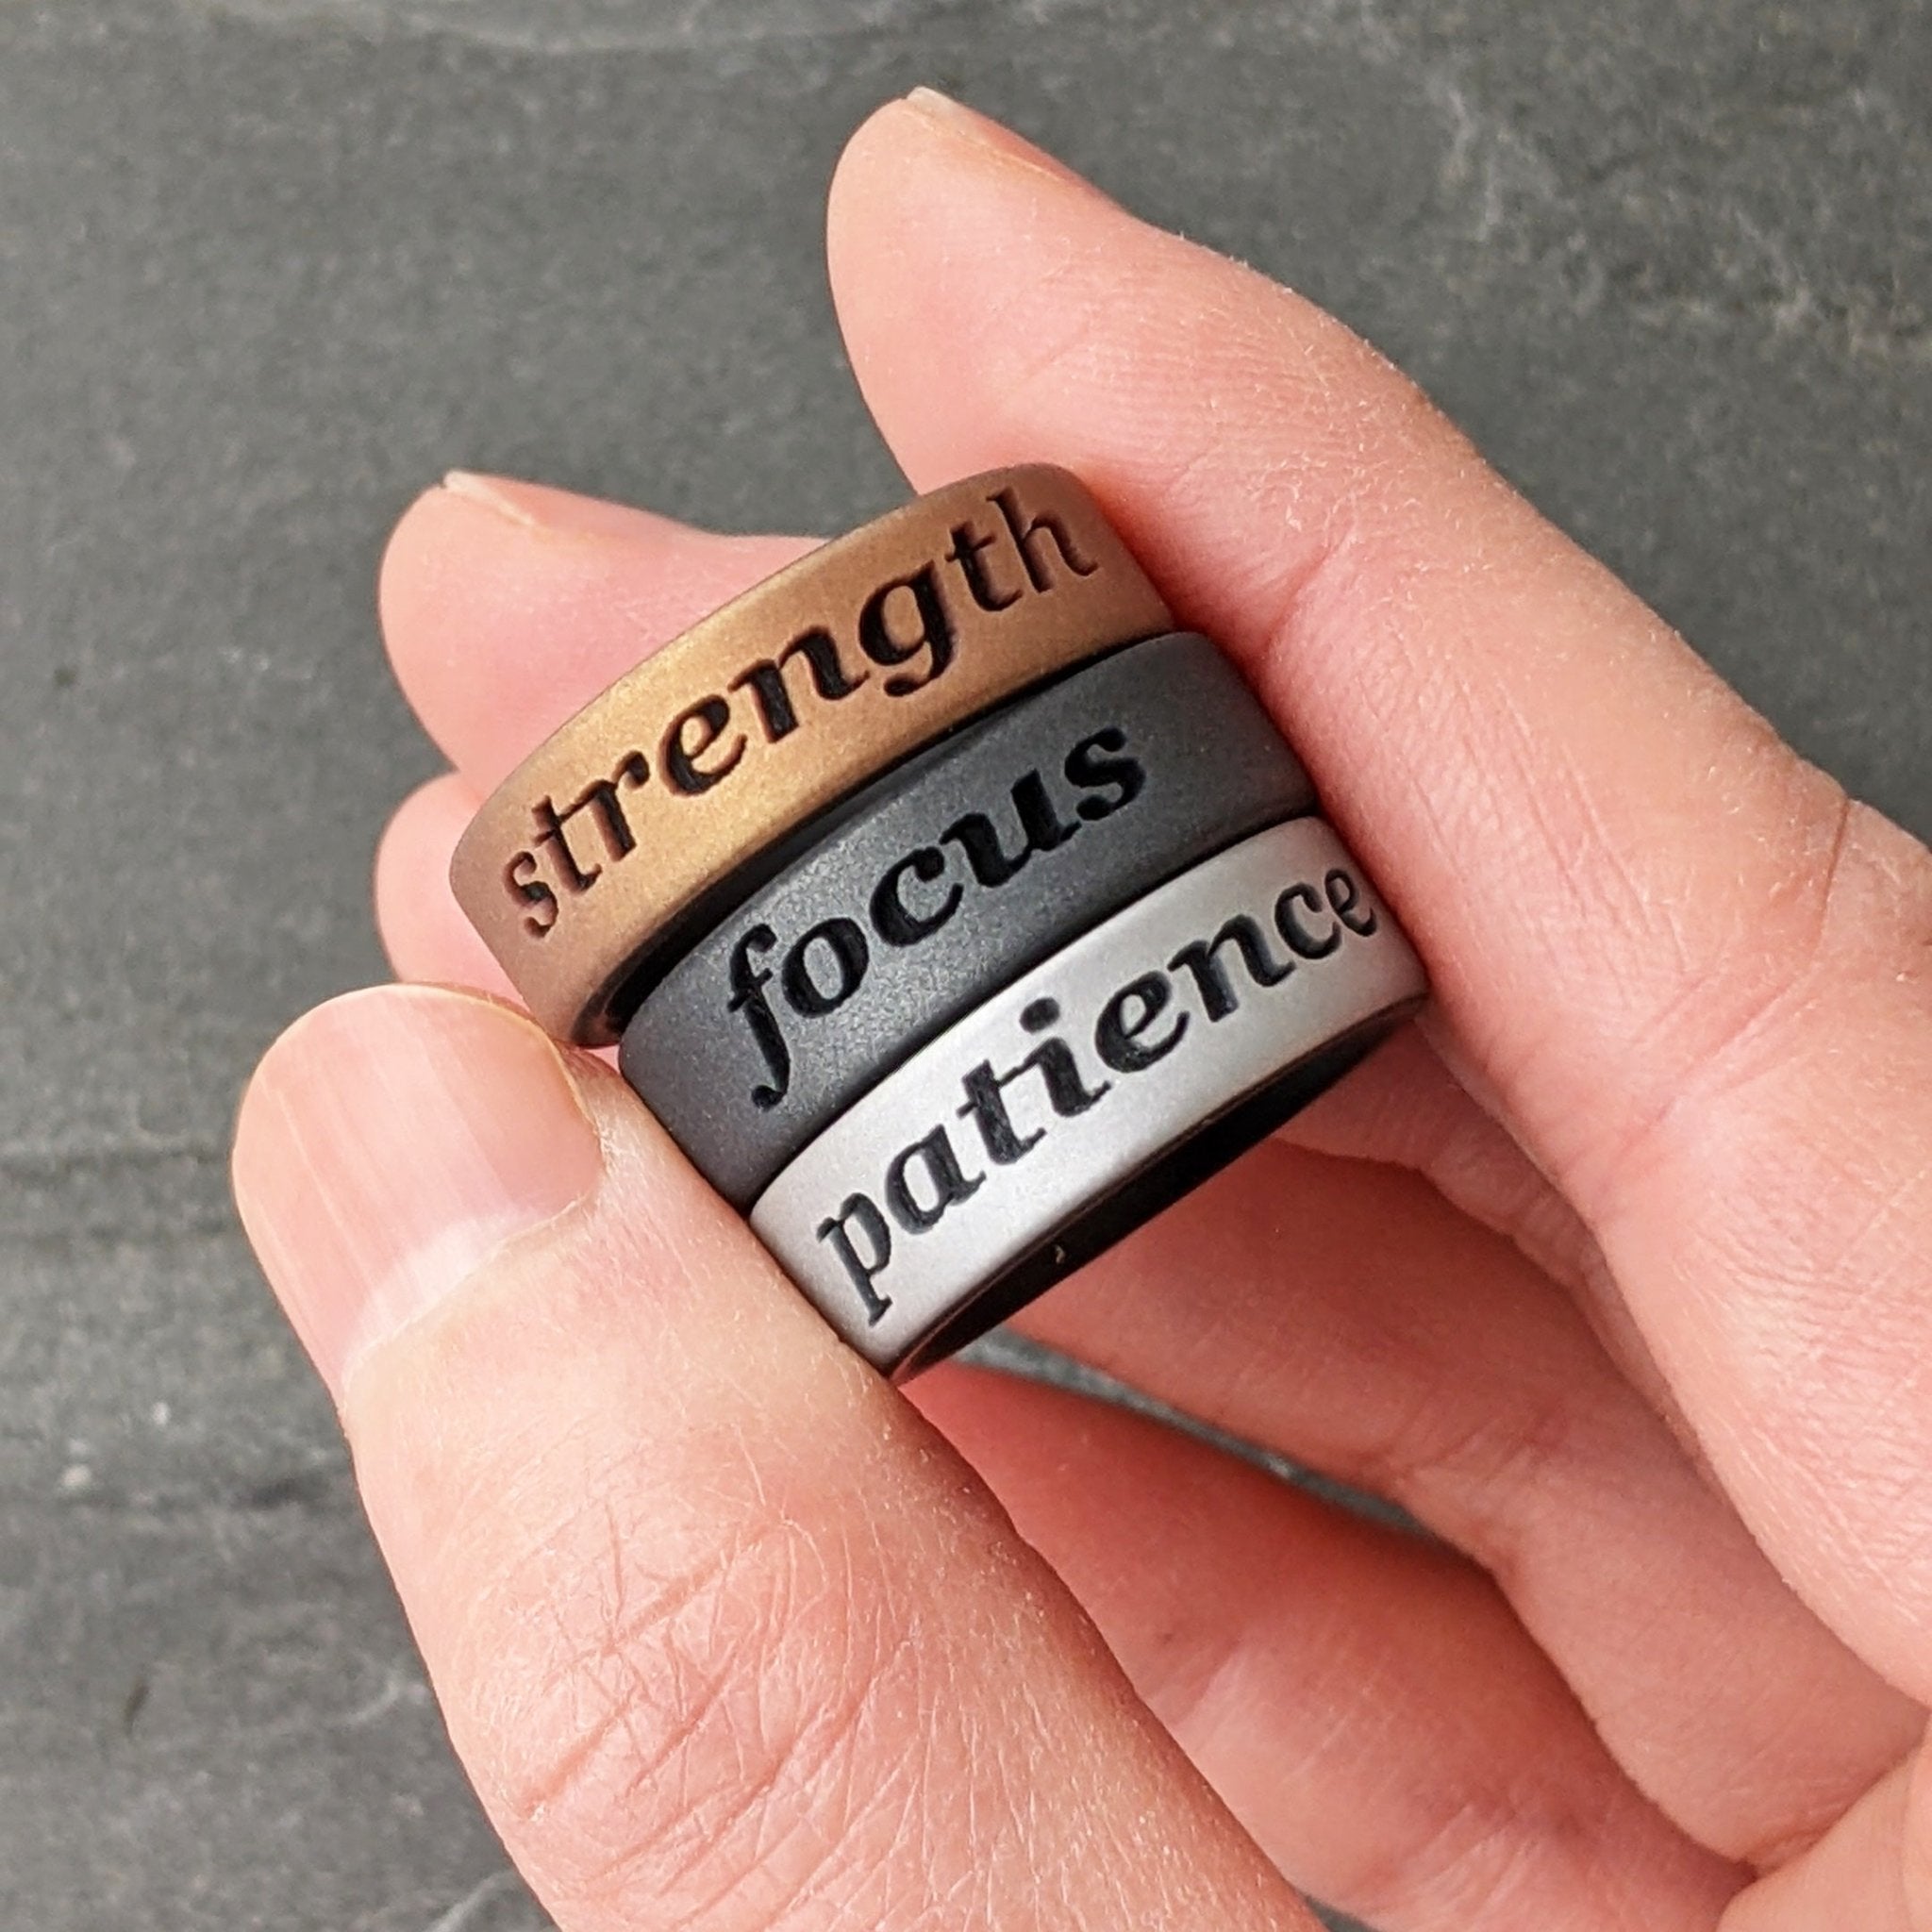 Custom Engraved Dual Layer Silicone Ring - Motivational Words, Mantras, Quotes, and More - Knot Theory